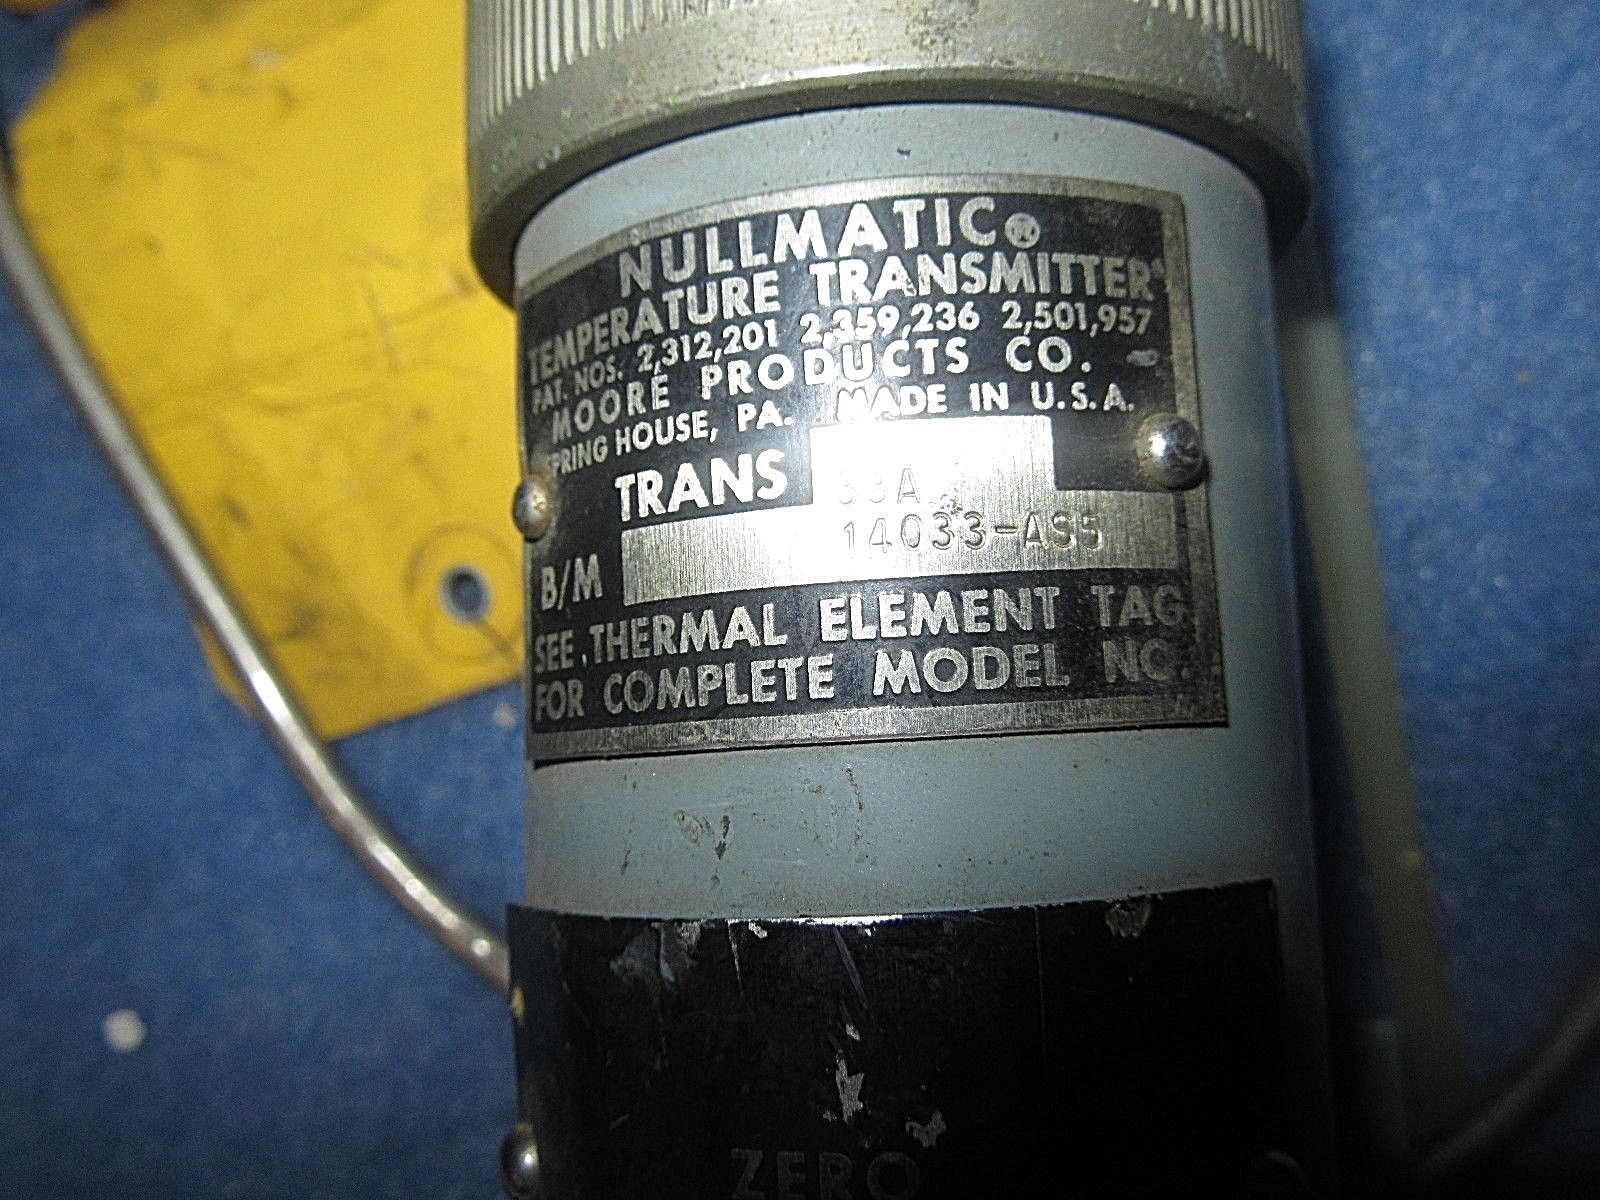 Details about   Nullmatic 33C Temperature Transmitter 14033-Cs4 